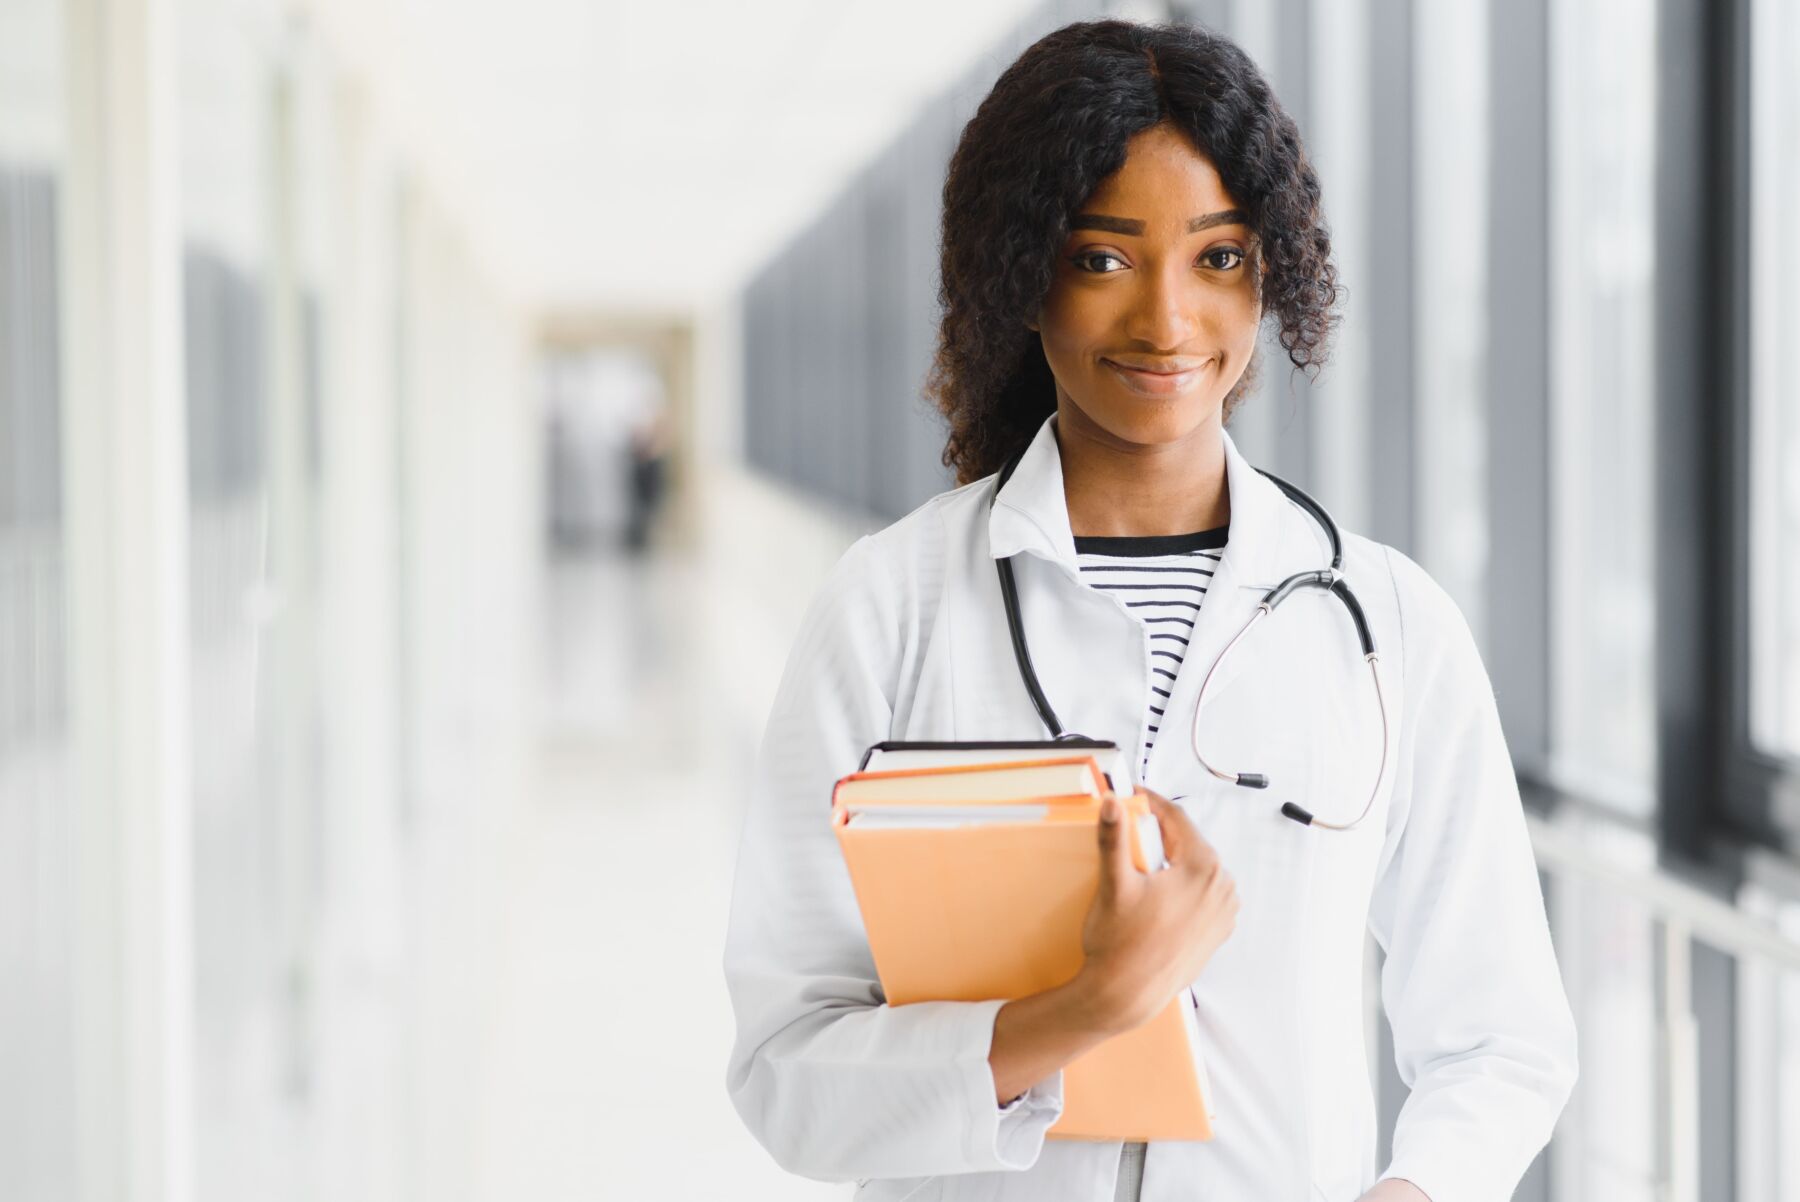 Are Private Loans a Good Idea to Pay for Medical School